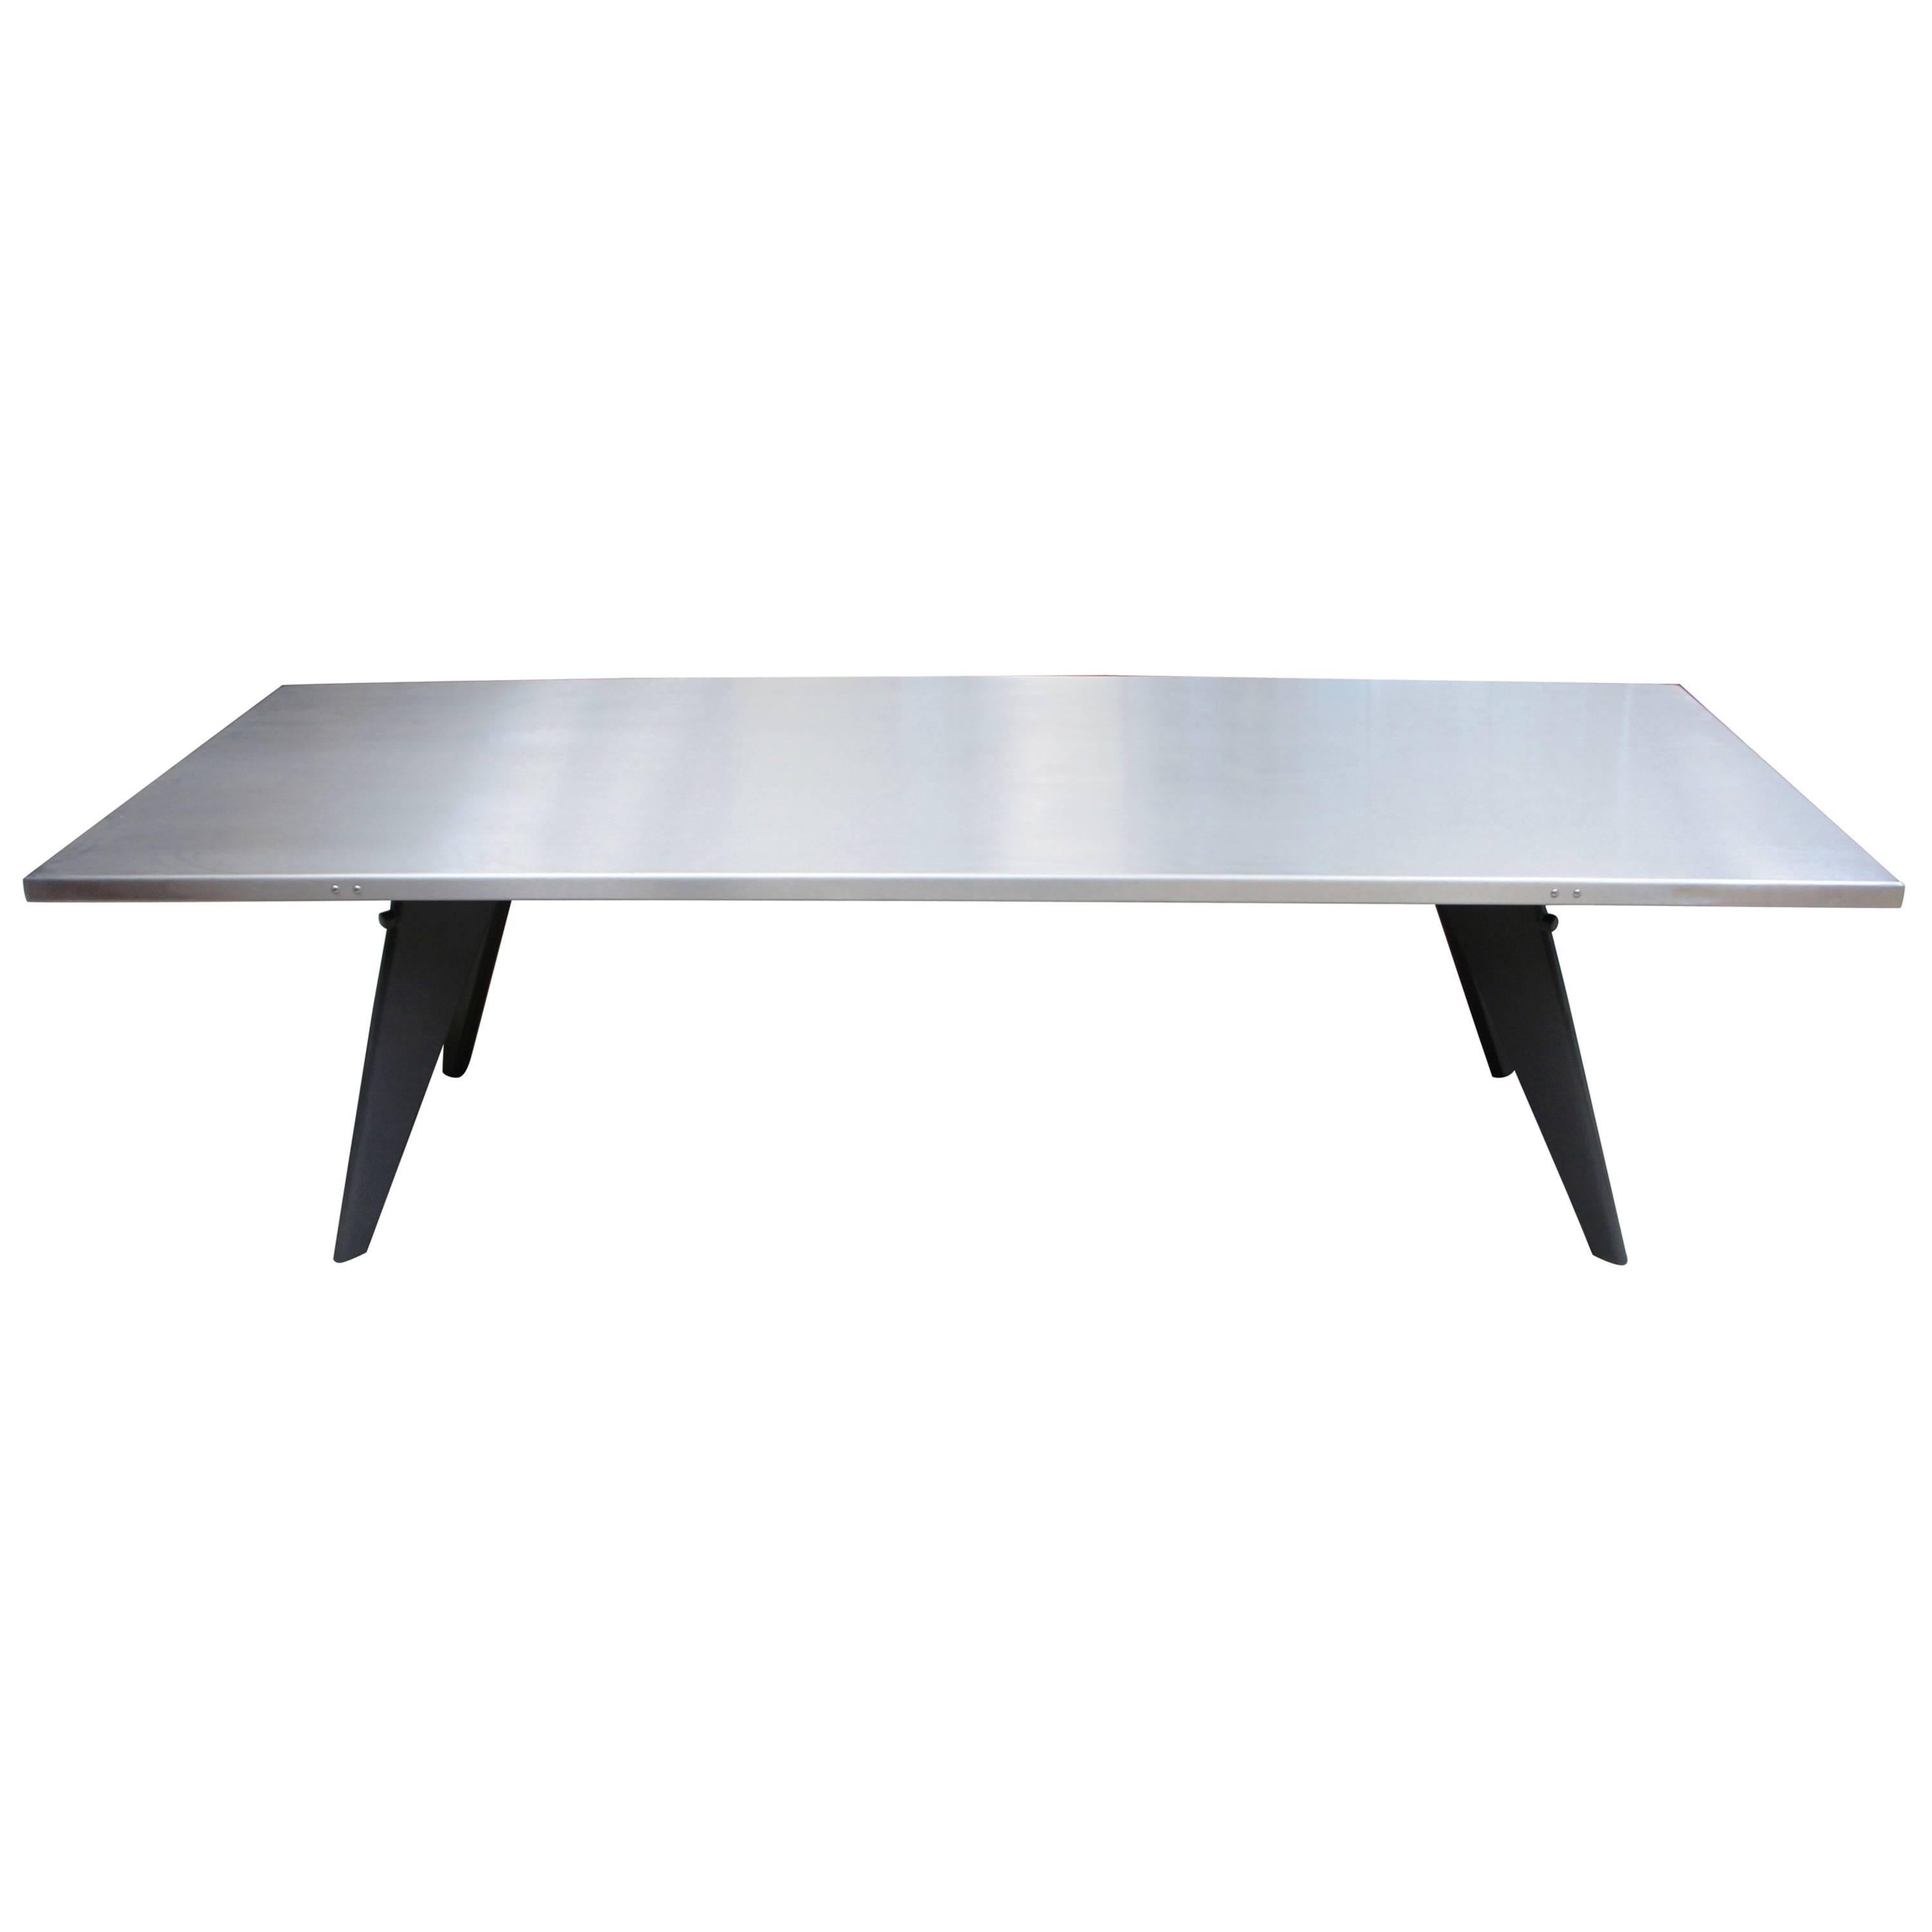 2011 Jean Prouve by G-Star Raw for Vitra S.A.M. Tropique Table